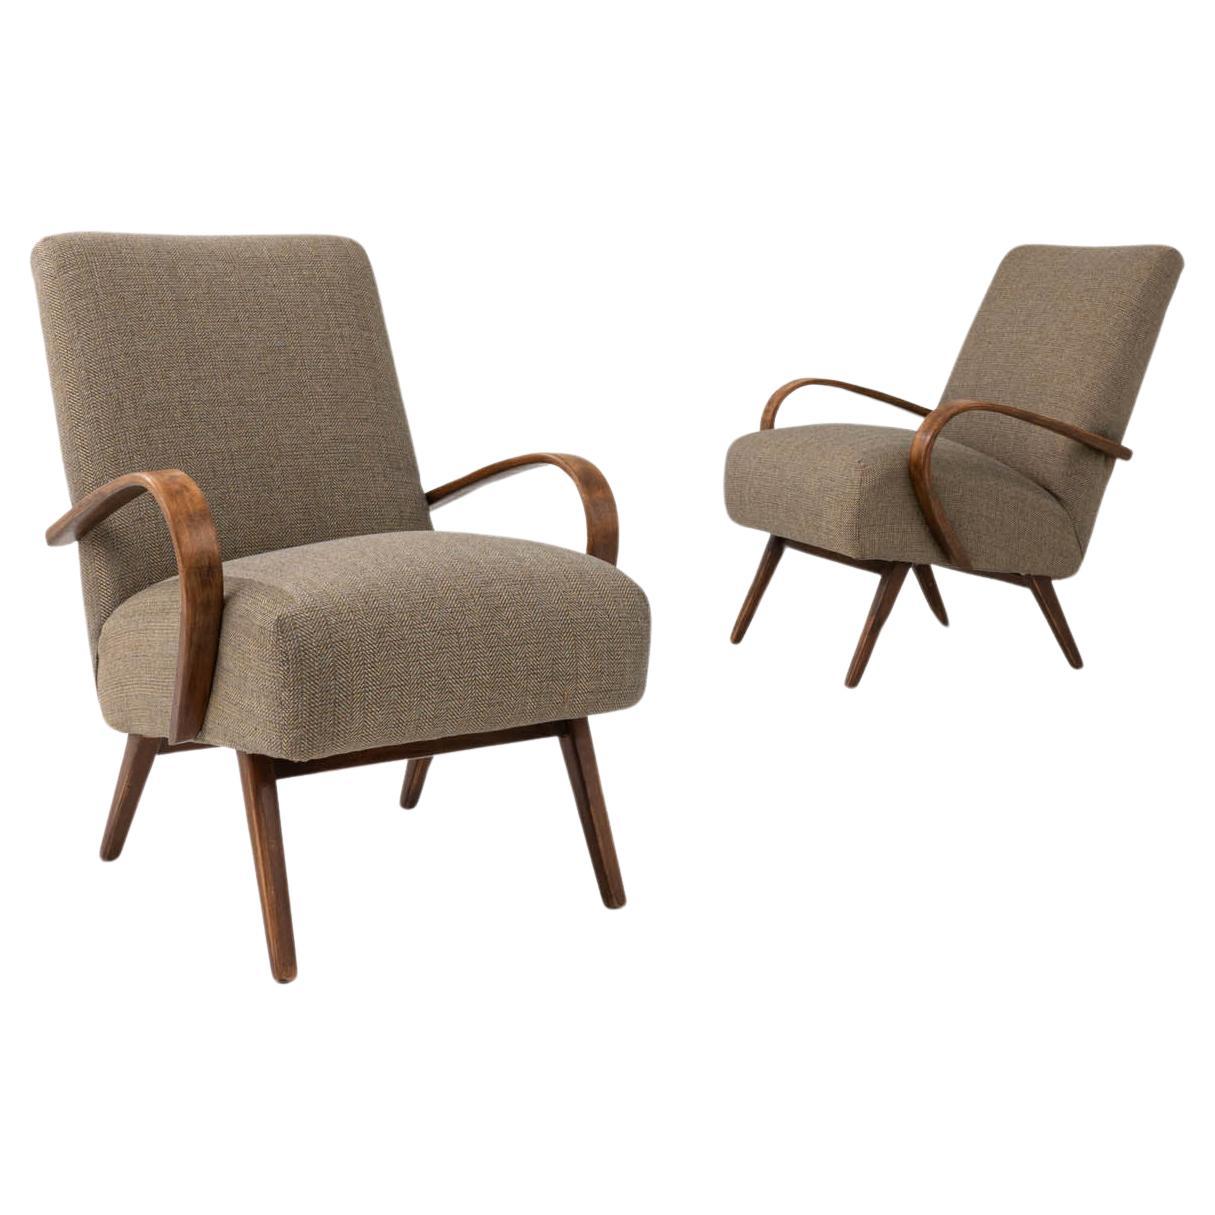 1950s Czech Beige Upholstered Armchairs, a Pair For Sale